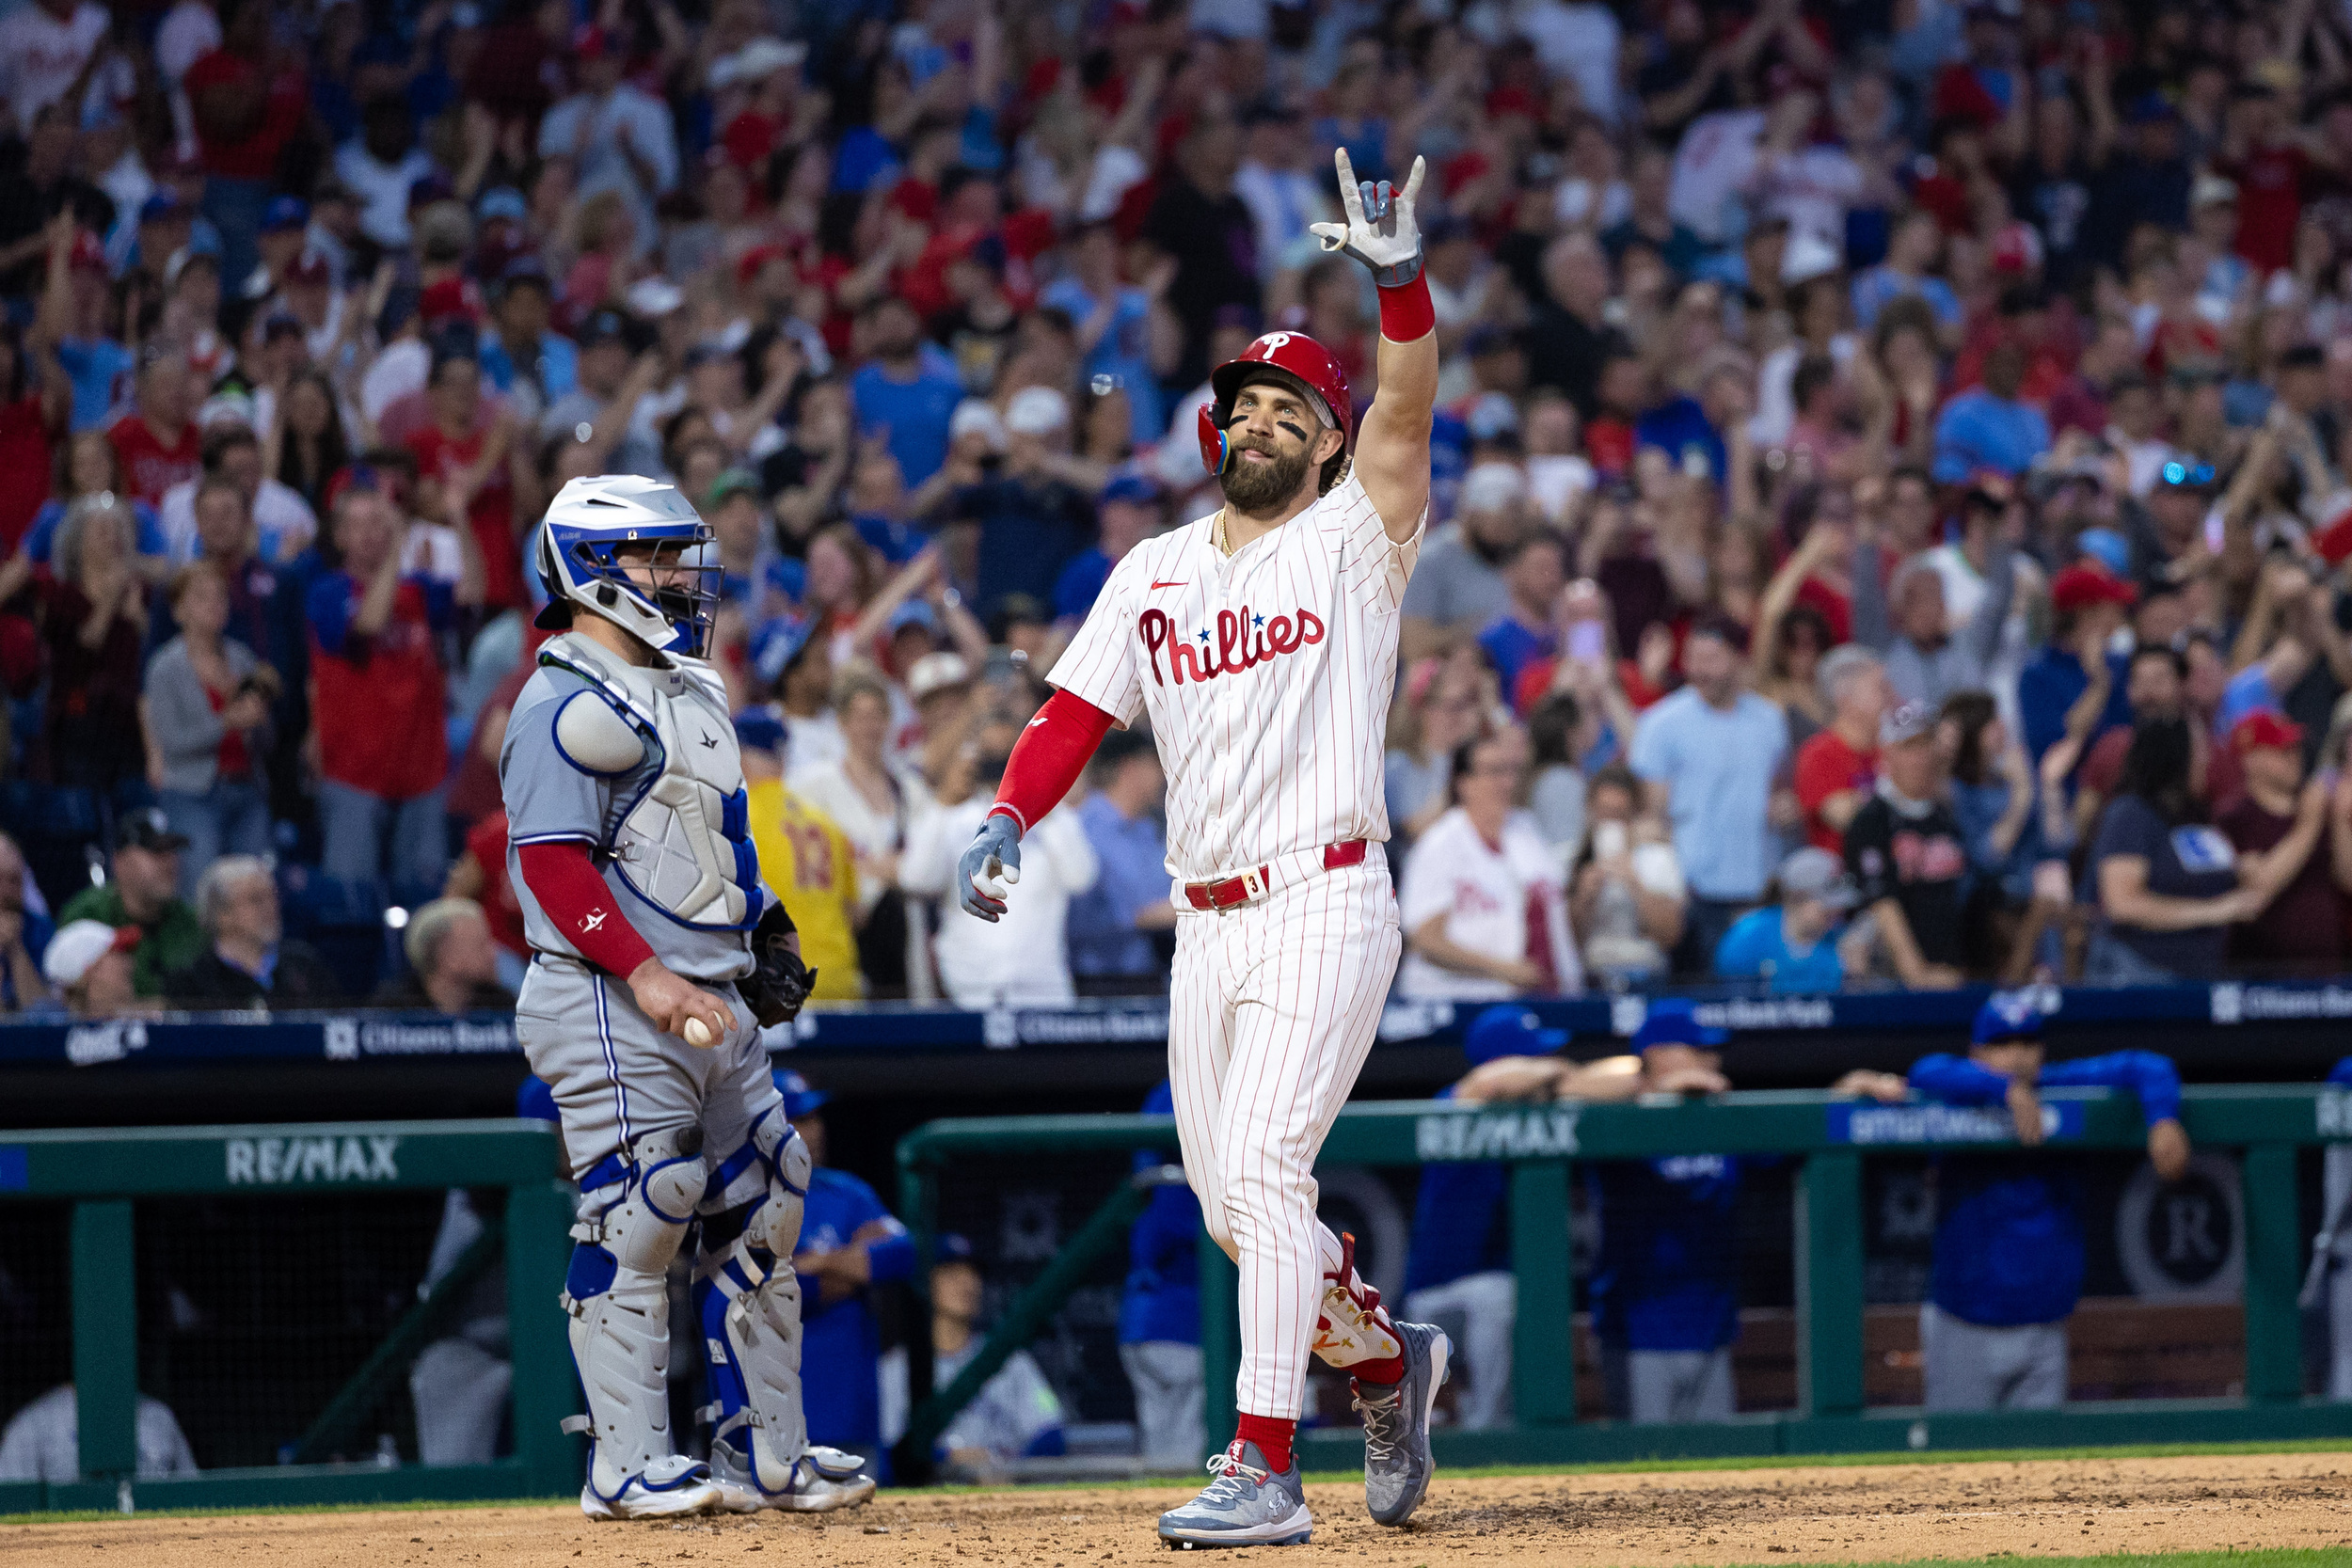 watch: phillies' bryce harper stays hot with another grand slam